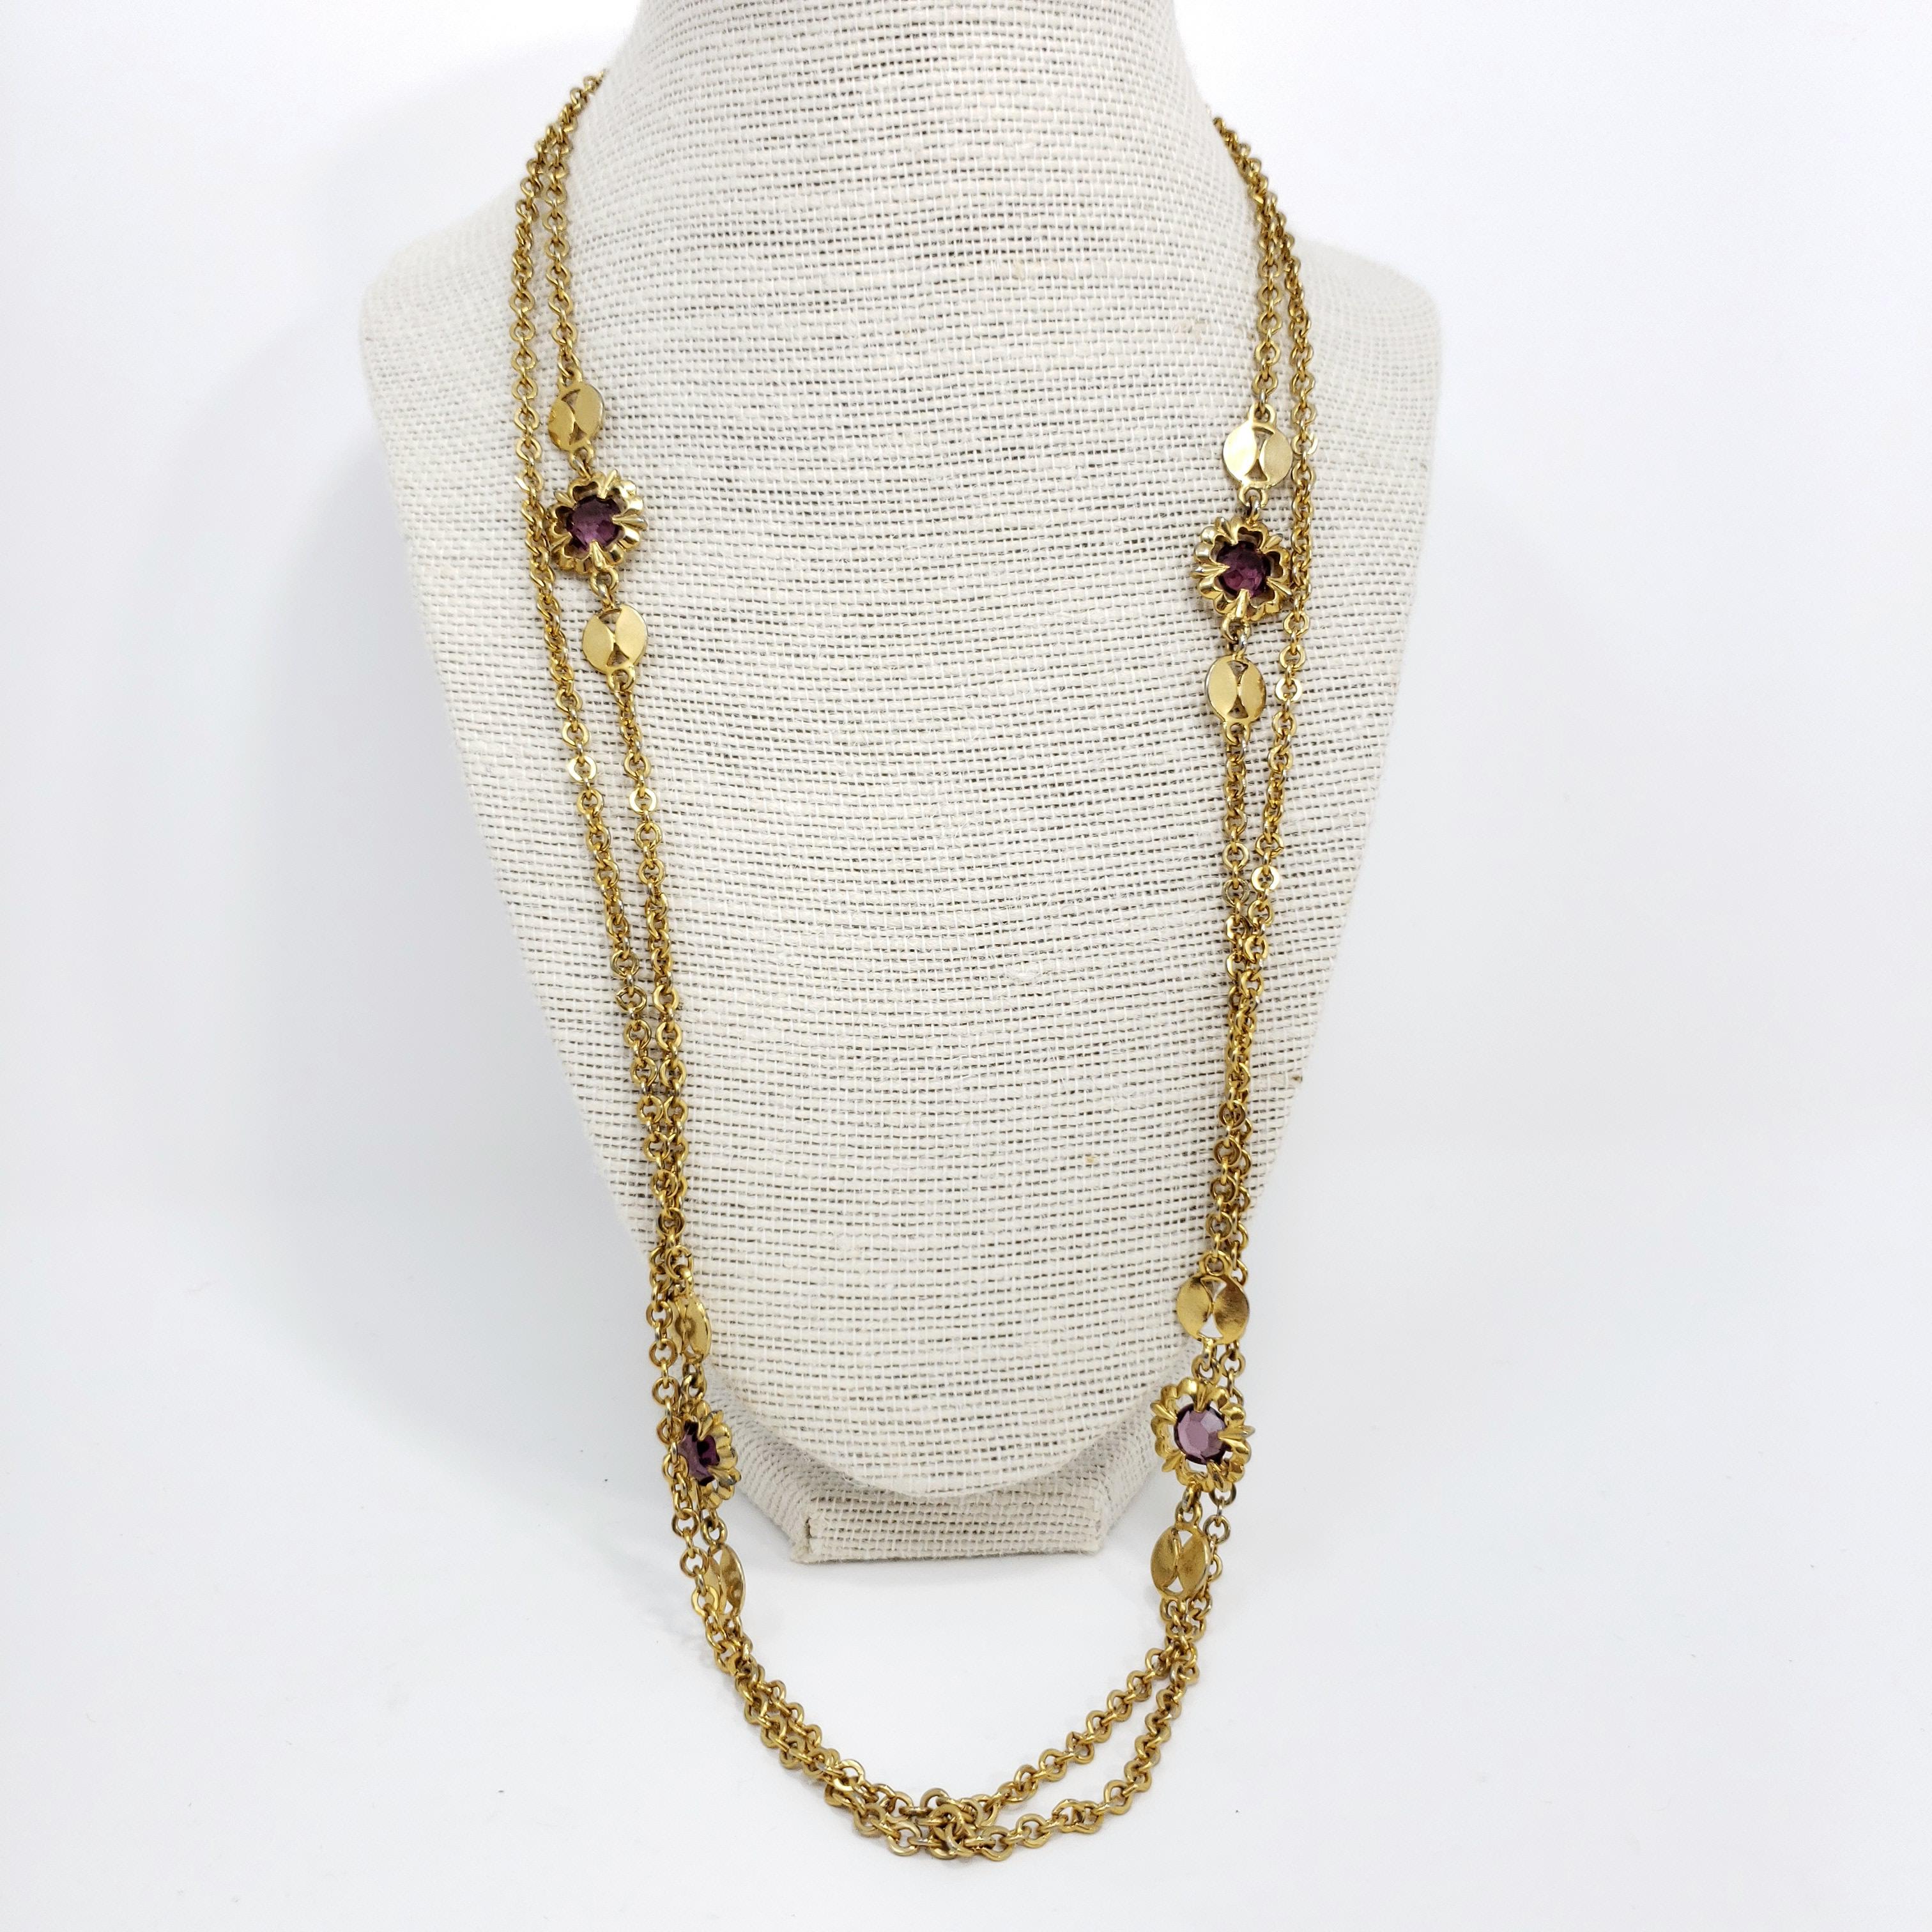 A golden rope-length necklace accented with amethyst crystals, inspired by Victorian style.